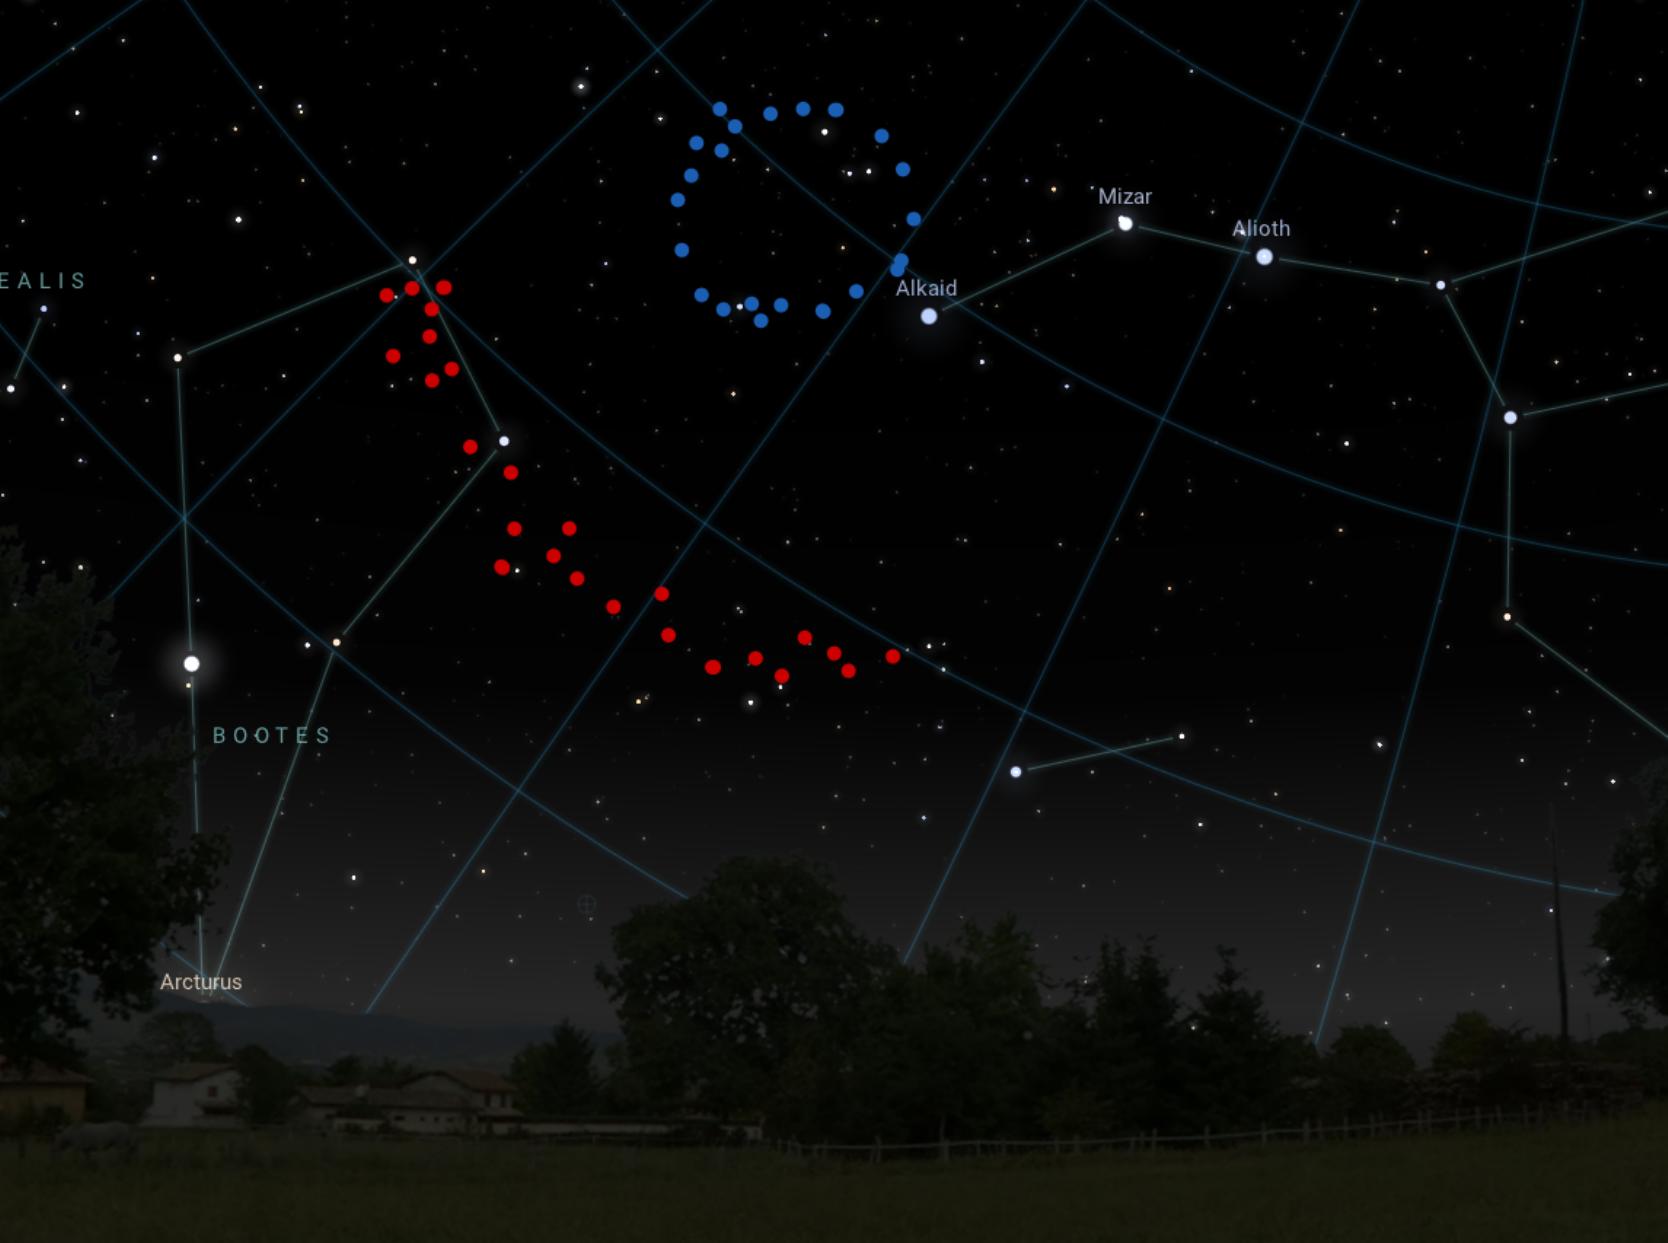 A map depicting the constellations in the sky, including a giant ring that is not real.